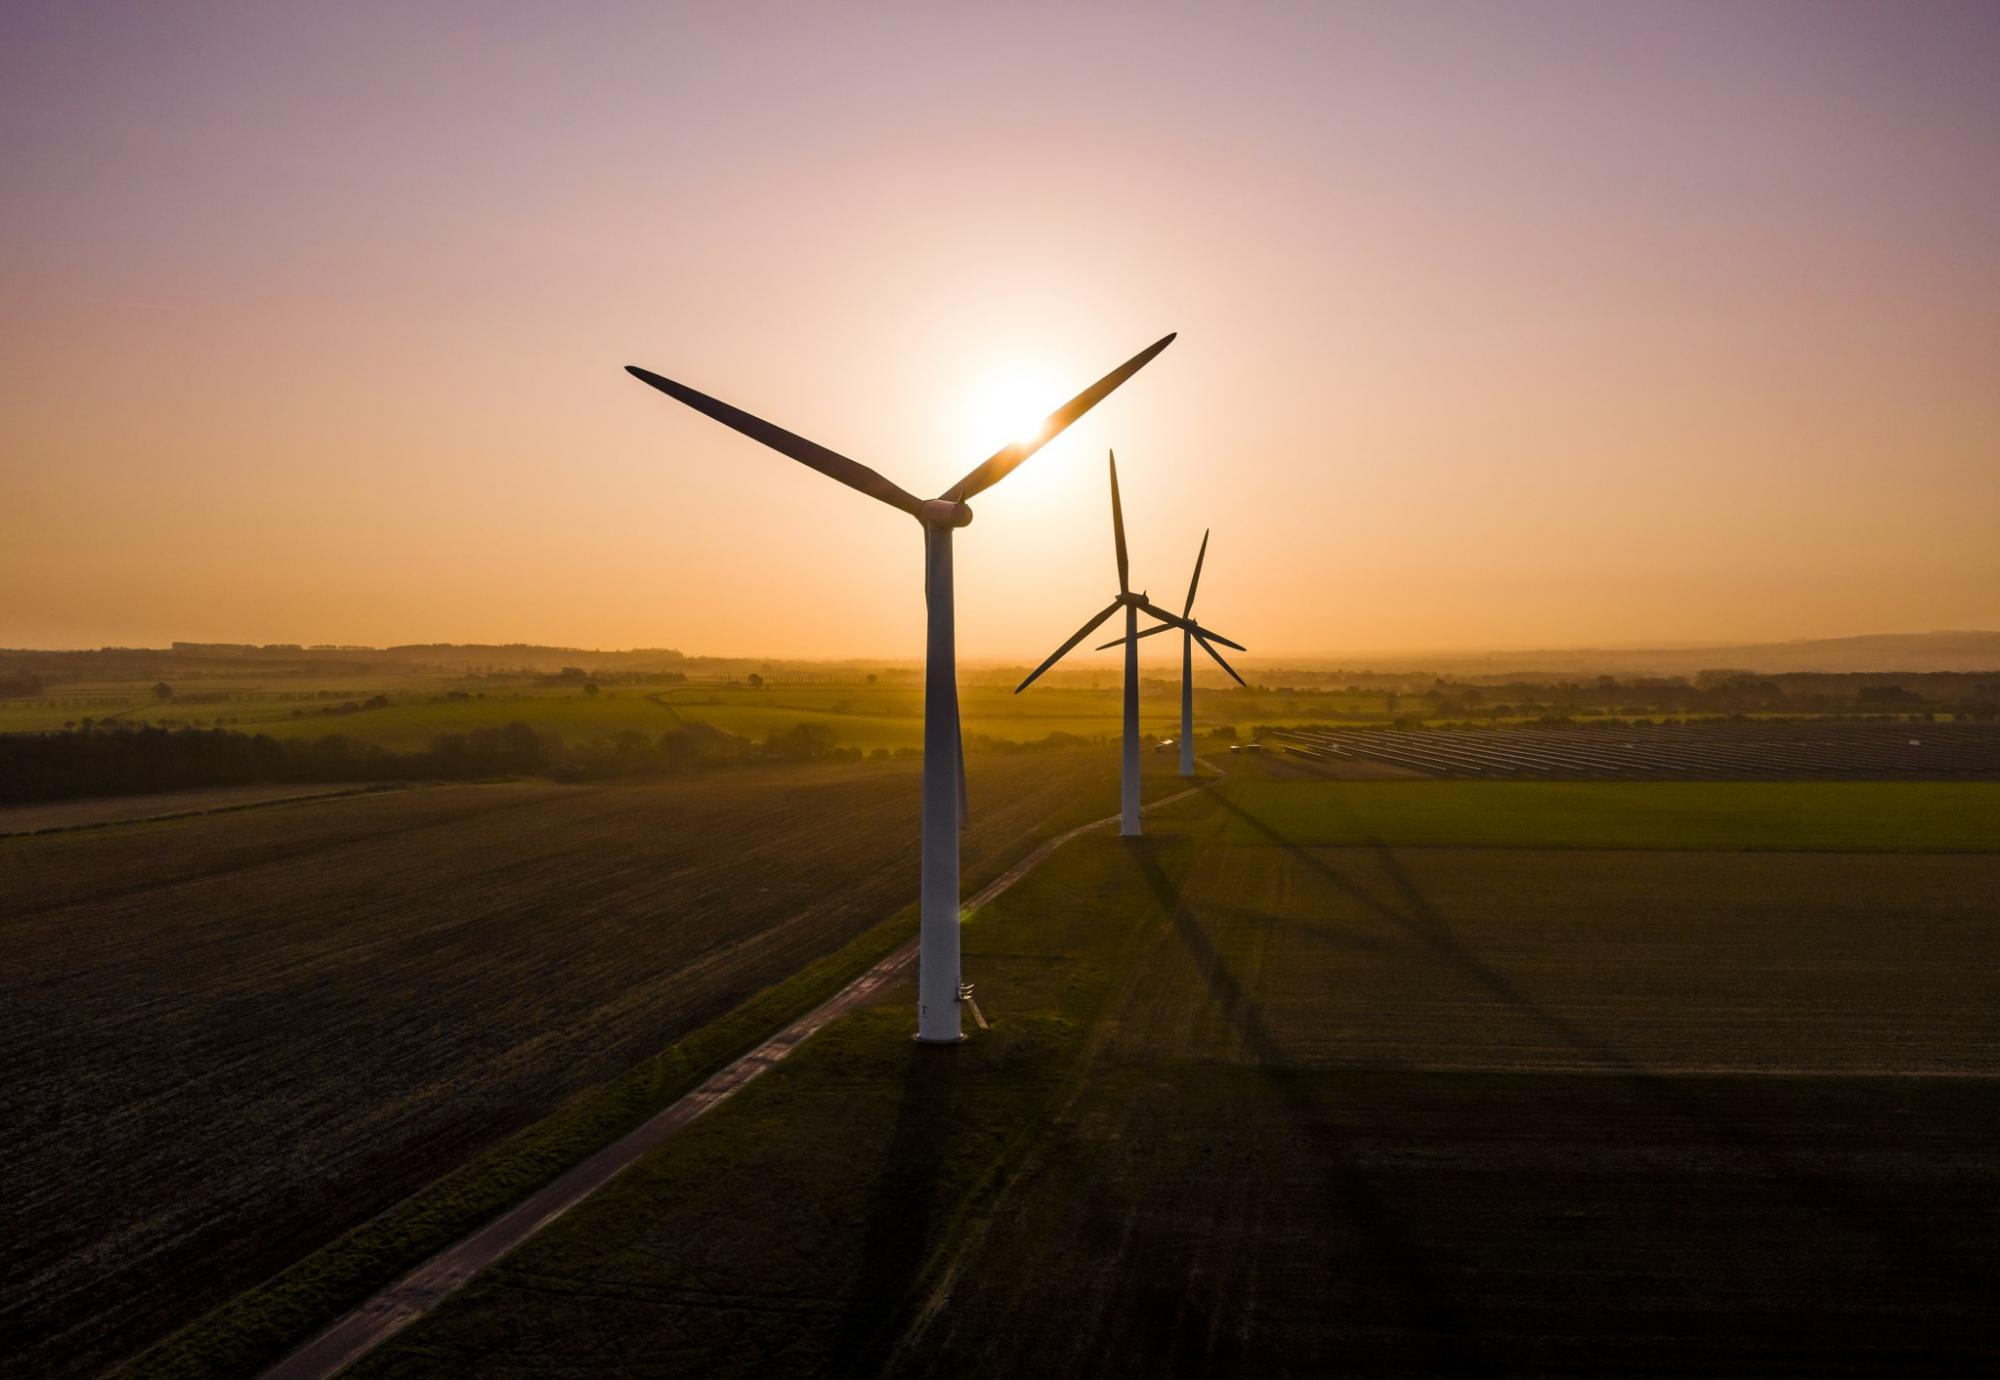 Plans to make the UK world leader in green energy announced 